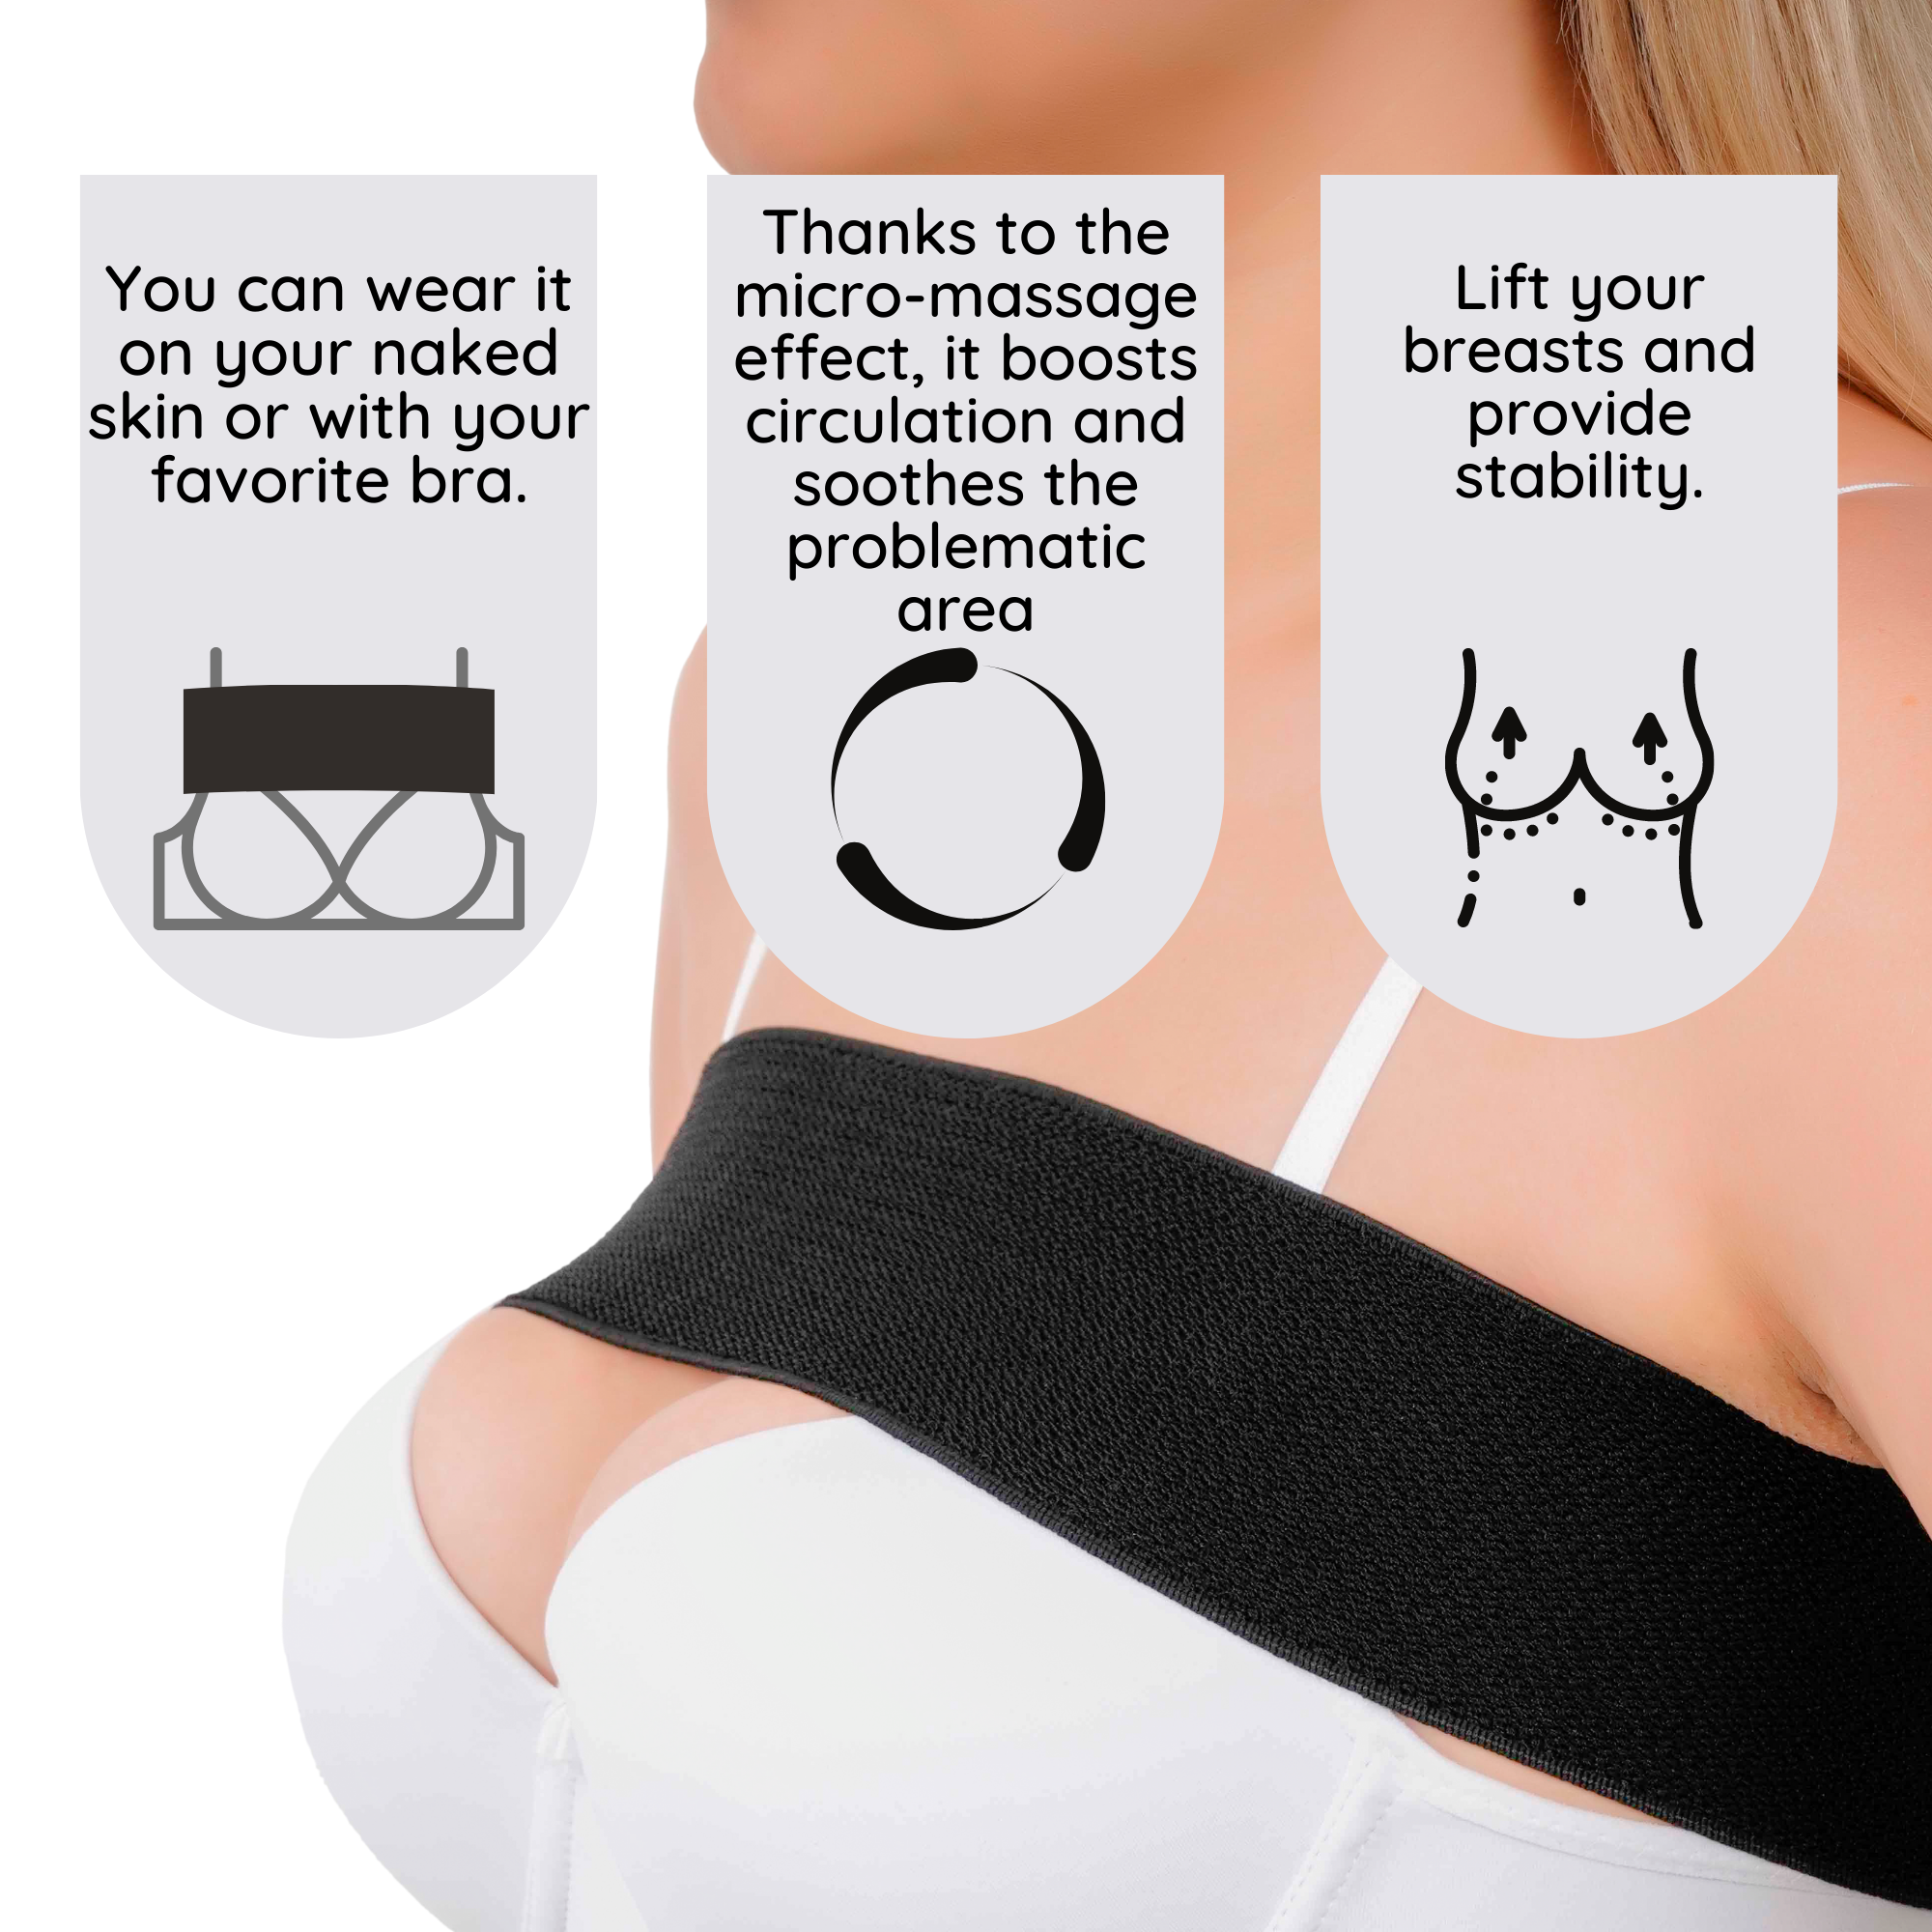 Breast Implant Support Band,Implant Stabilizer Band Black Breast Support  Band Implant Stabilizer Band Tried and Trusted 